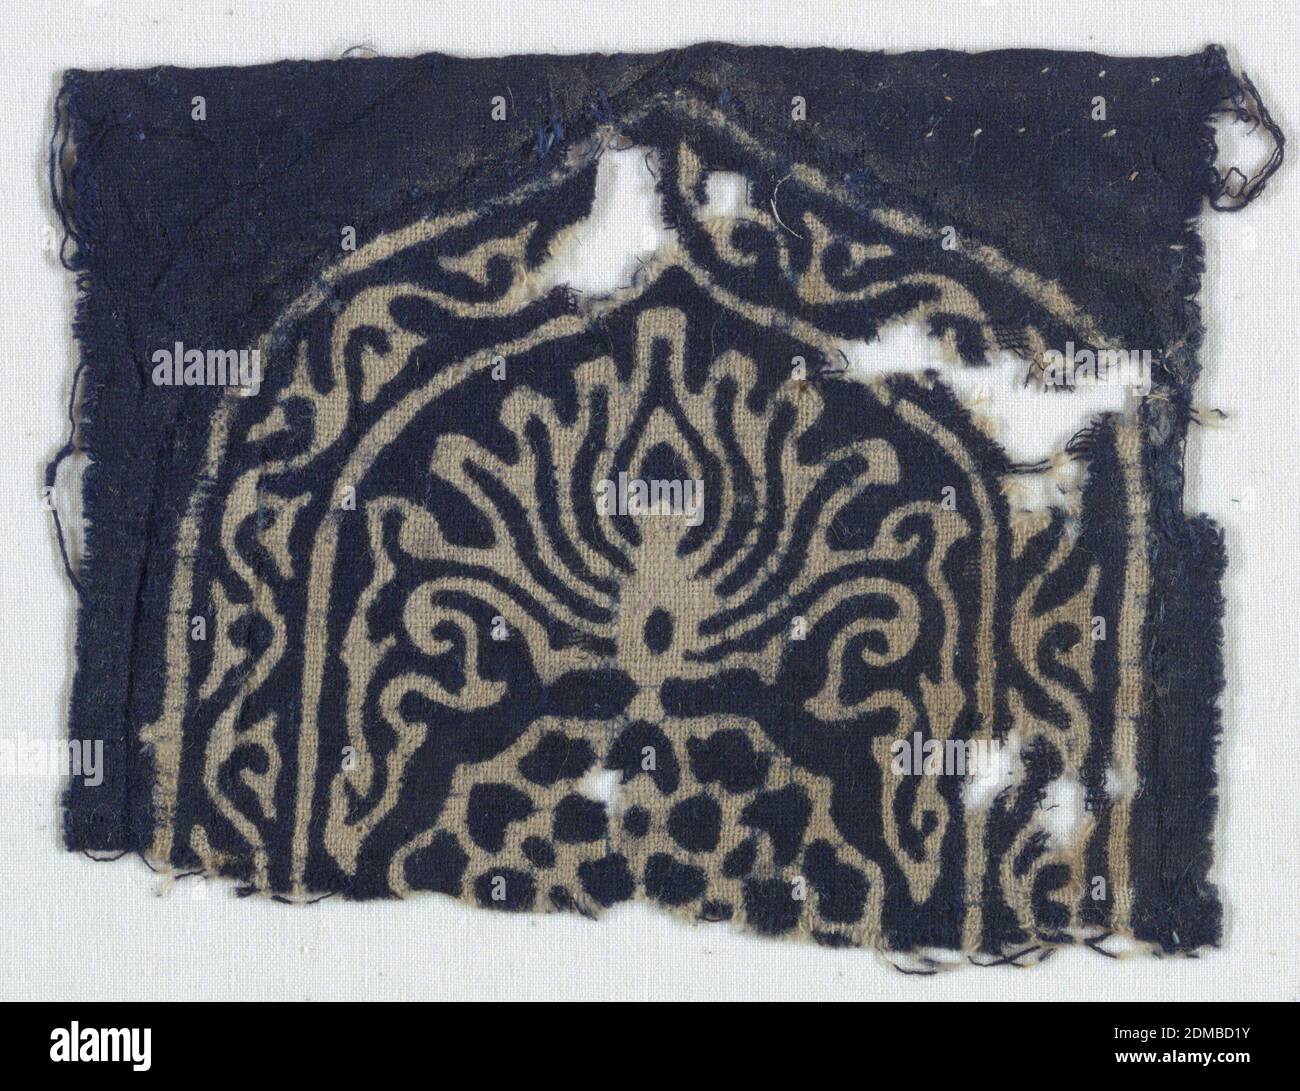 Fragment, Medium: cotton Technique: resist-printed on plain weave, Design is resist-printed in indigo, reserved in natural color; shows top half of a shield shape with border enclosing arabesques or vines. A stylized lotus is inside the 'shield' and below, half of a round petal shape is visible. Printing on reverse is identical and equally clear., India, 14th–15th century, printed, dyed & painted textiles, Fragment Stock Photo